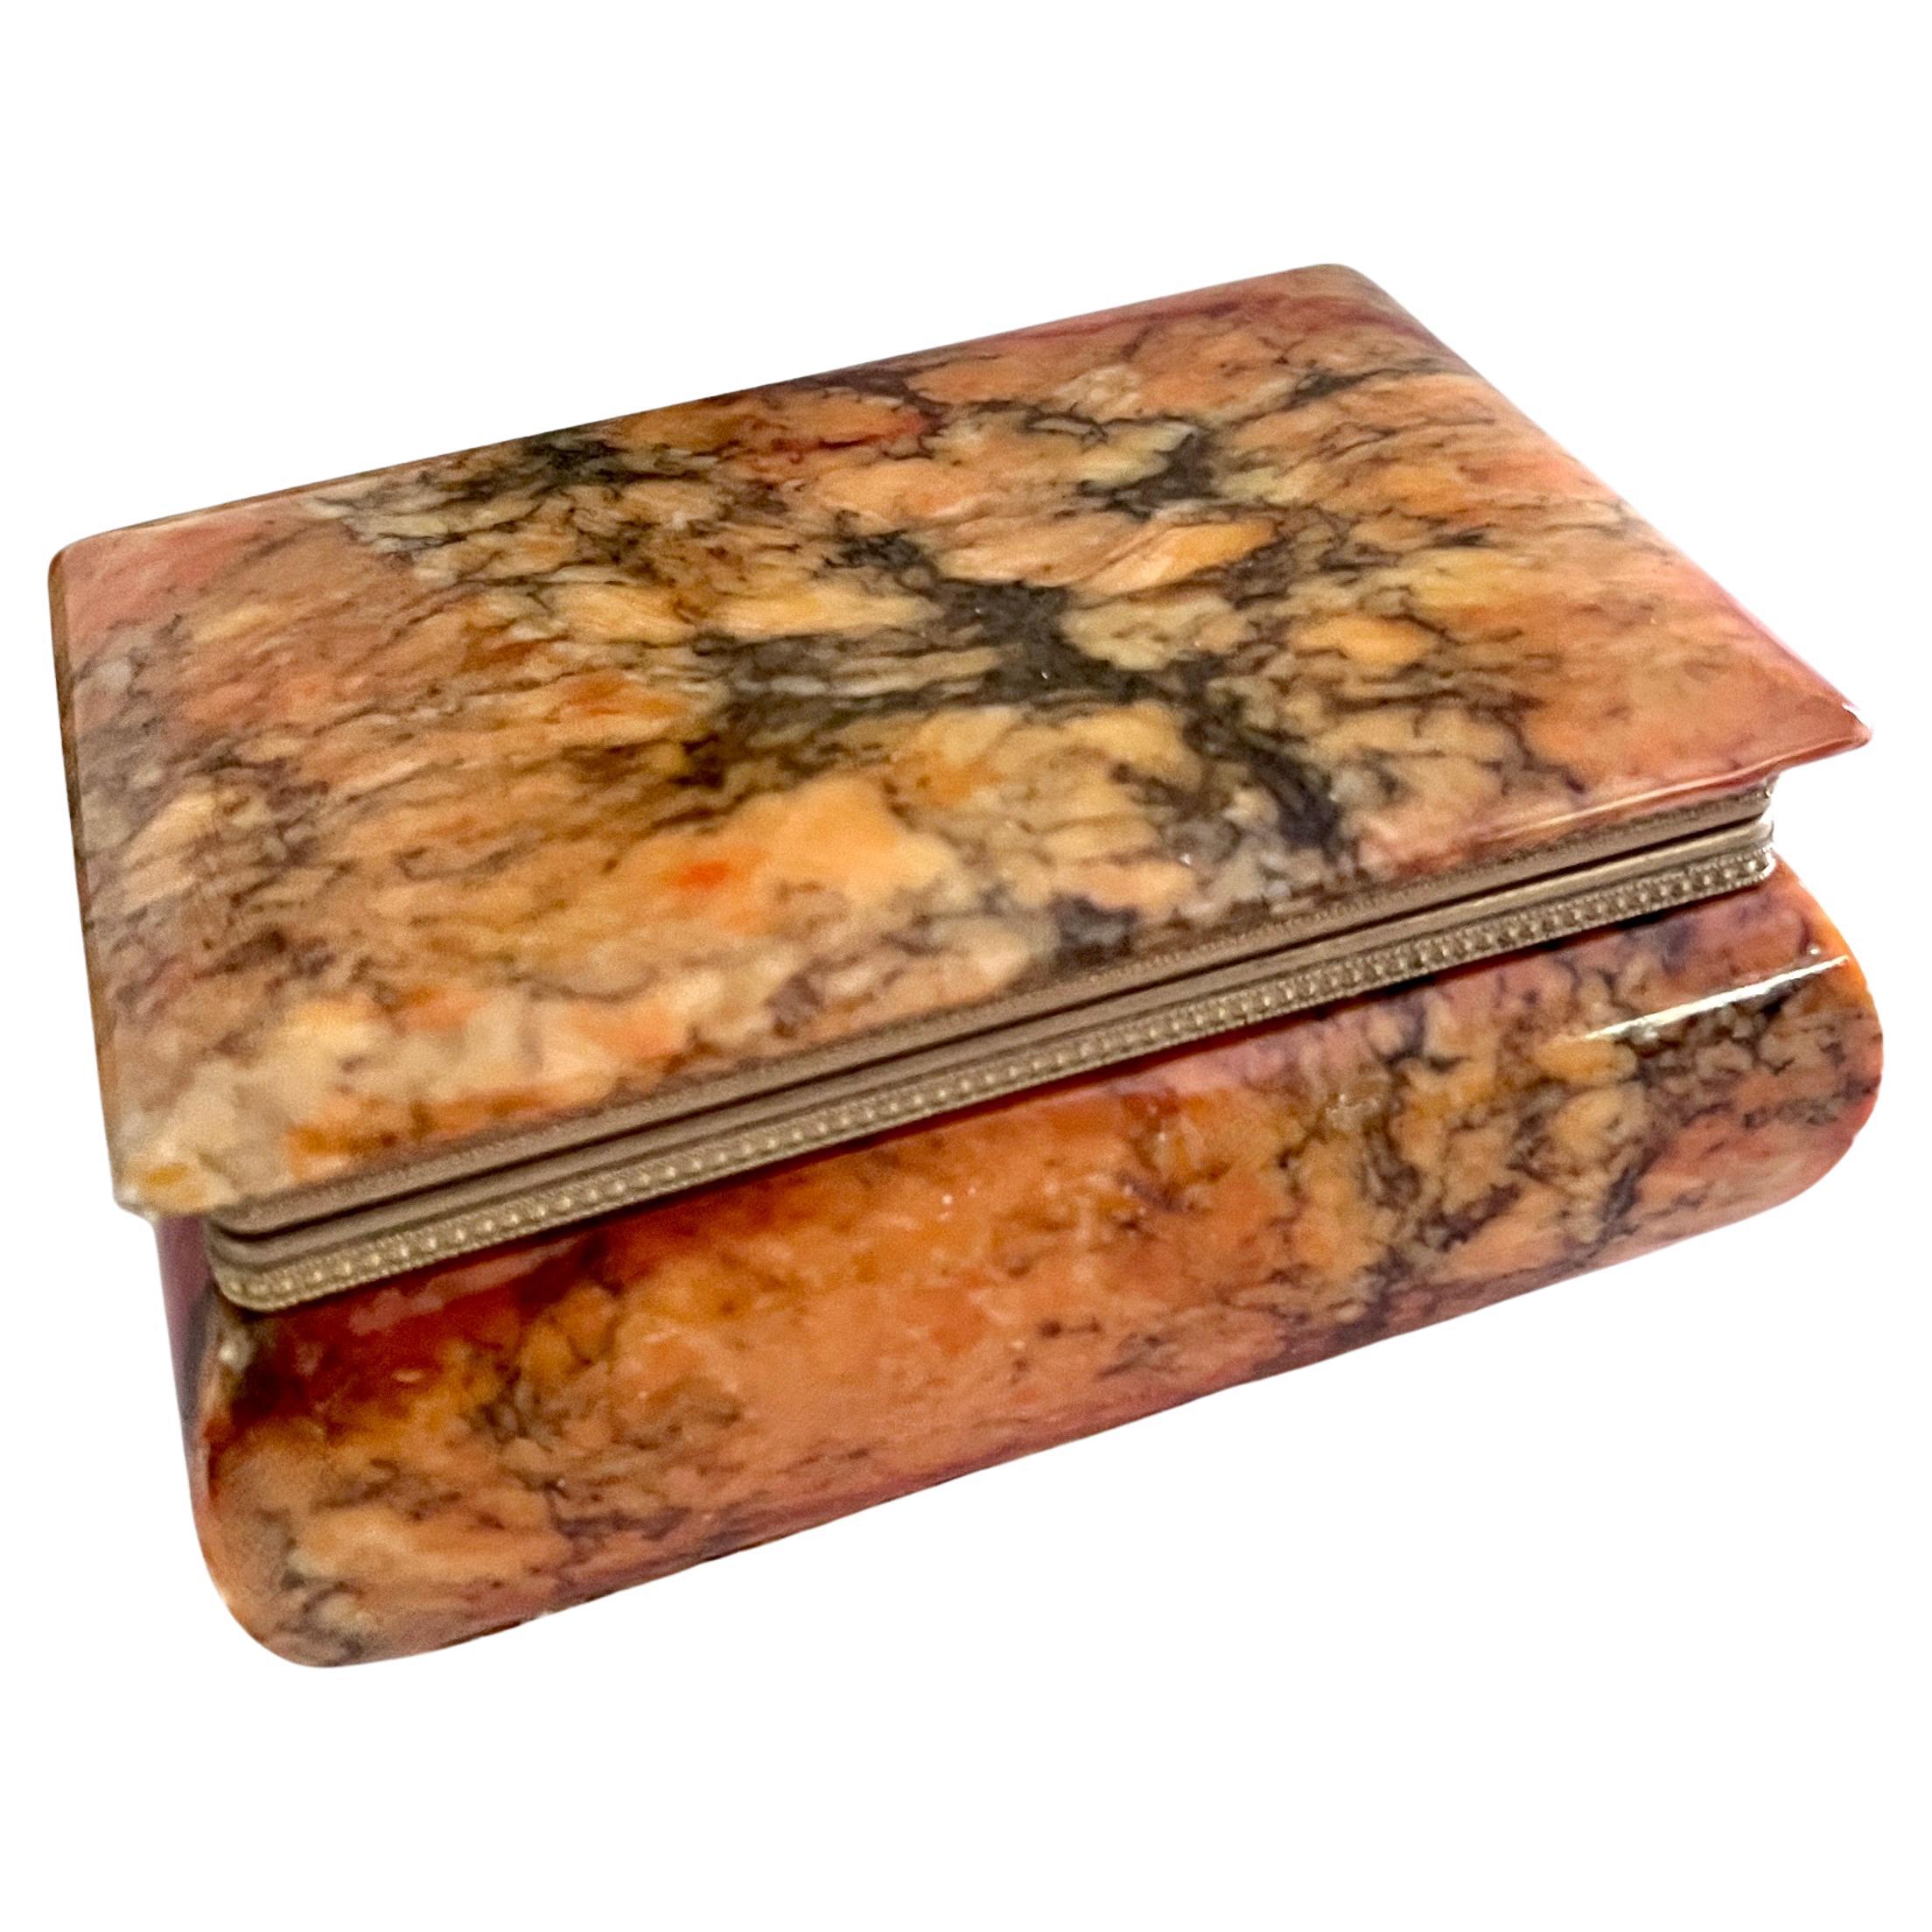 A vibrant Orange and Golden color Alabaster box with a brass trimmed closure.

The box is ideal for jewelry, decor on a cocktail table or holding office supplies on your desk or work station.

One of our favorite boxes - the color and condition is